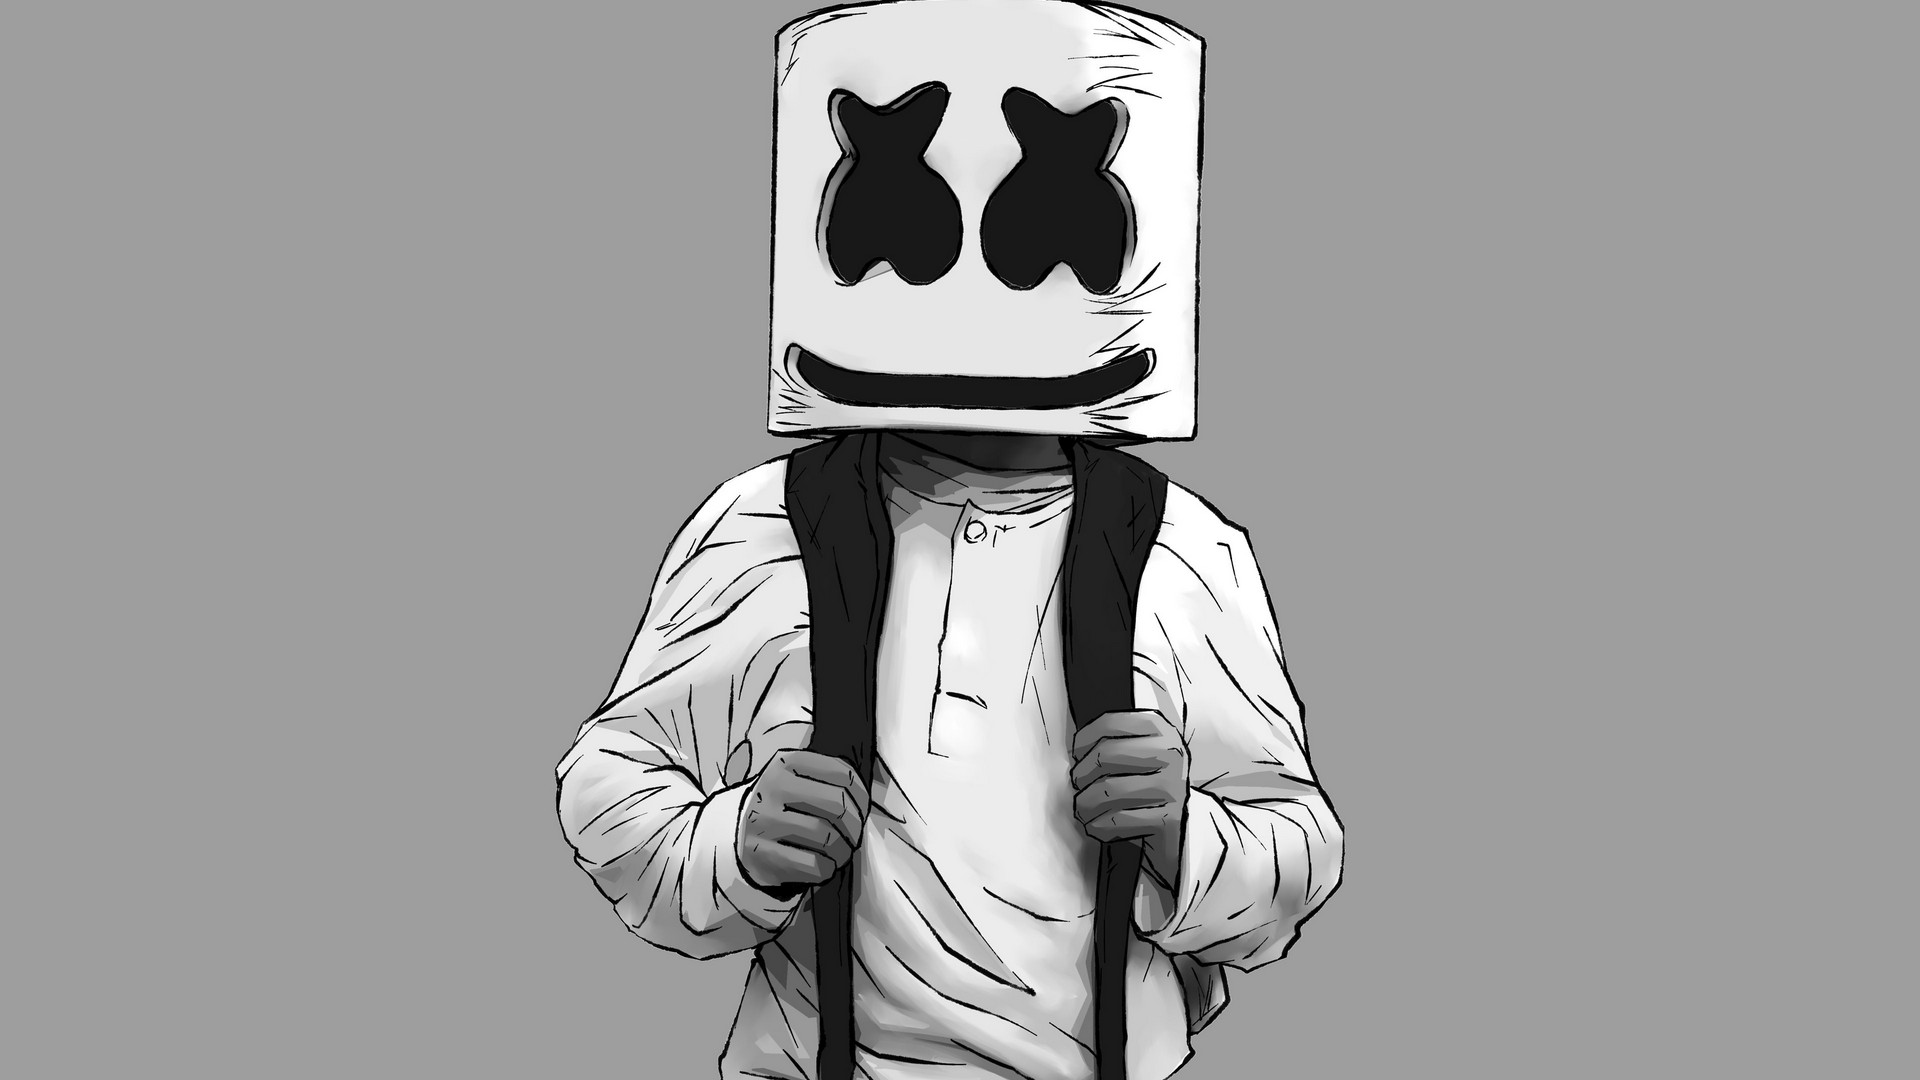 Marshmello Desktop Backgrounds HD with high-resolution 1920x1080 pixel. You can use this wallpaper for your Windows and Mac OS computers as well as your Android and iPhone smartphones